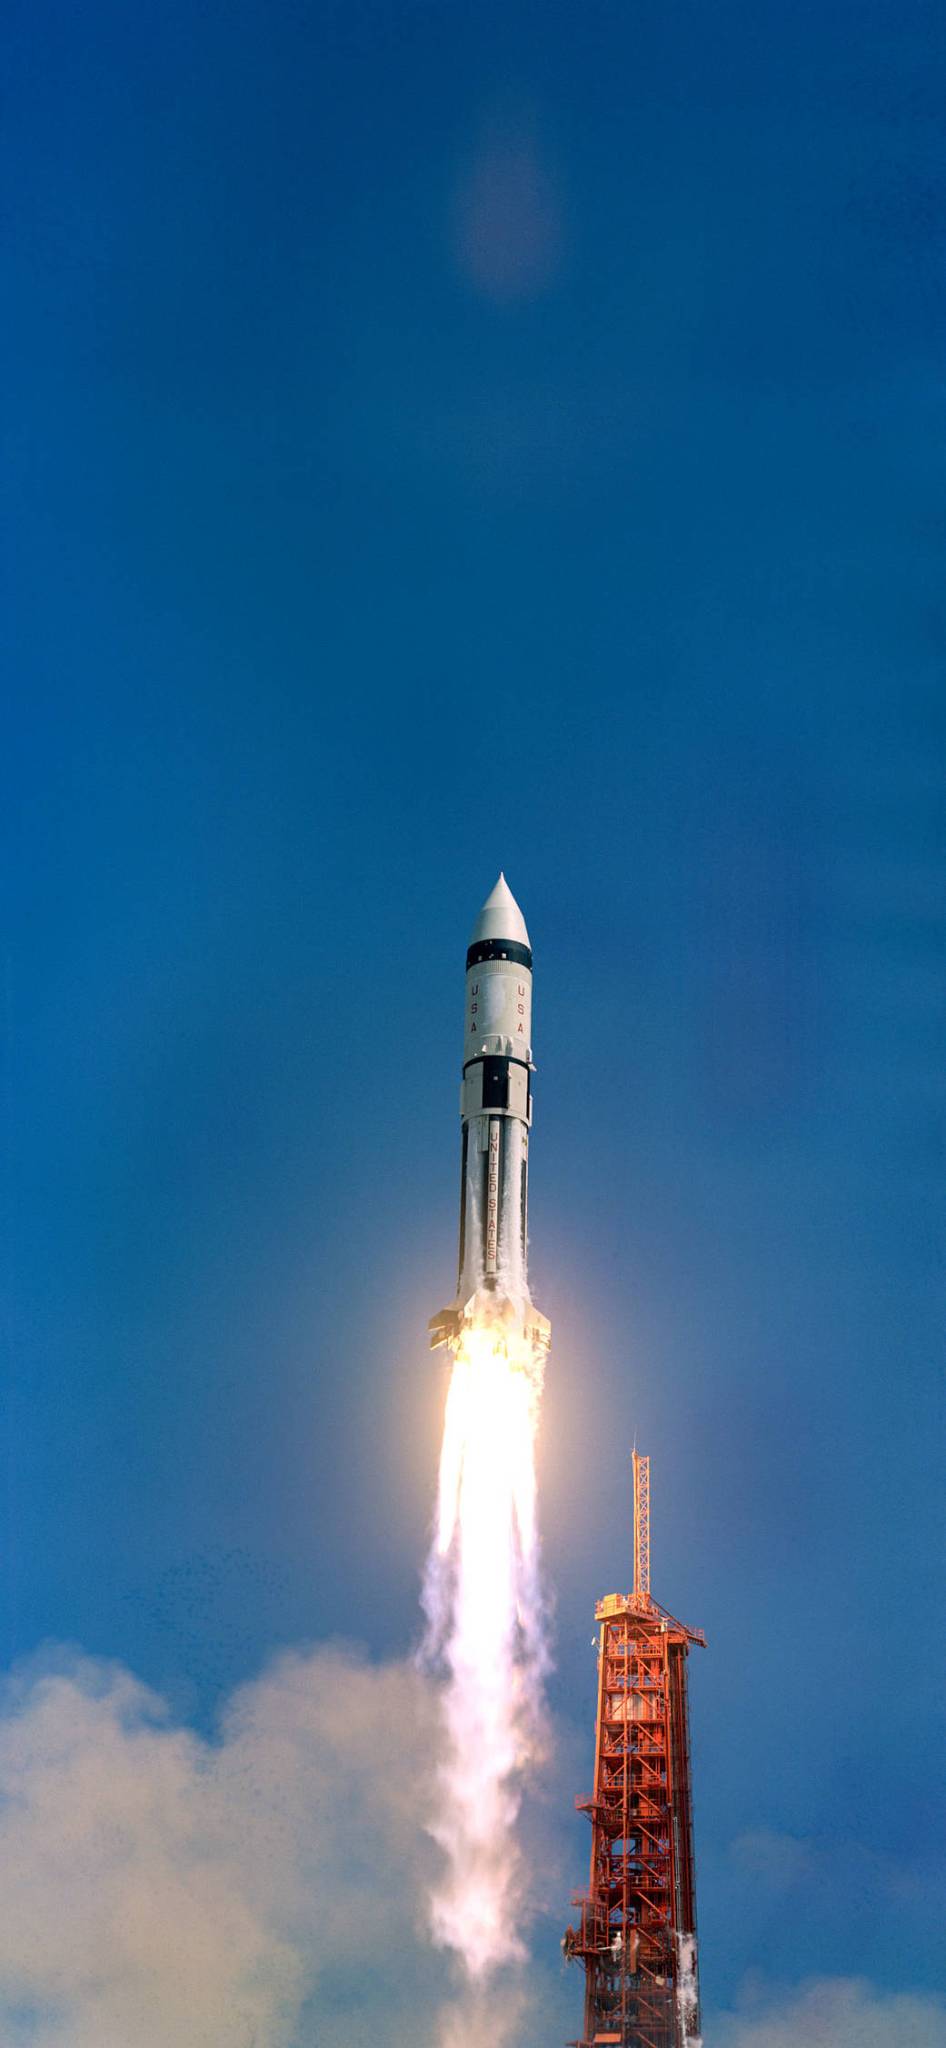 This week in 1966, the AS-203 rocket launched from NASA’s Kennedy Space Center. 